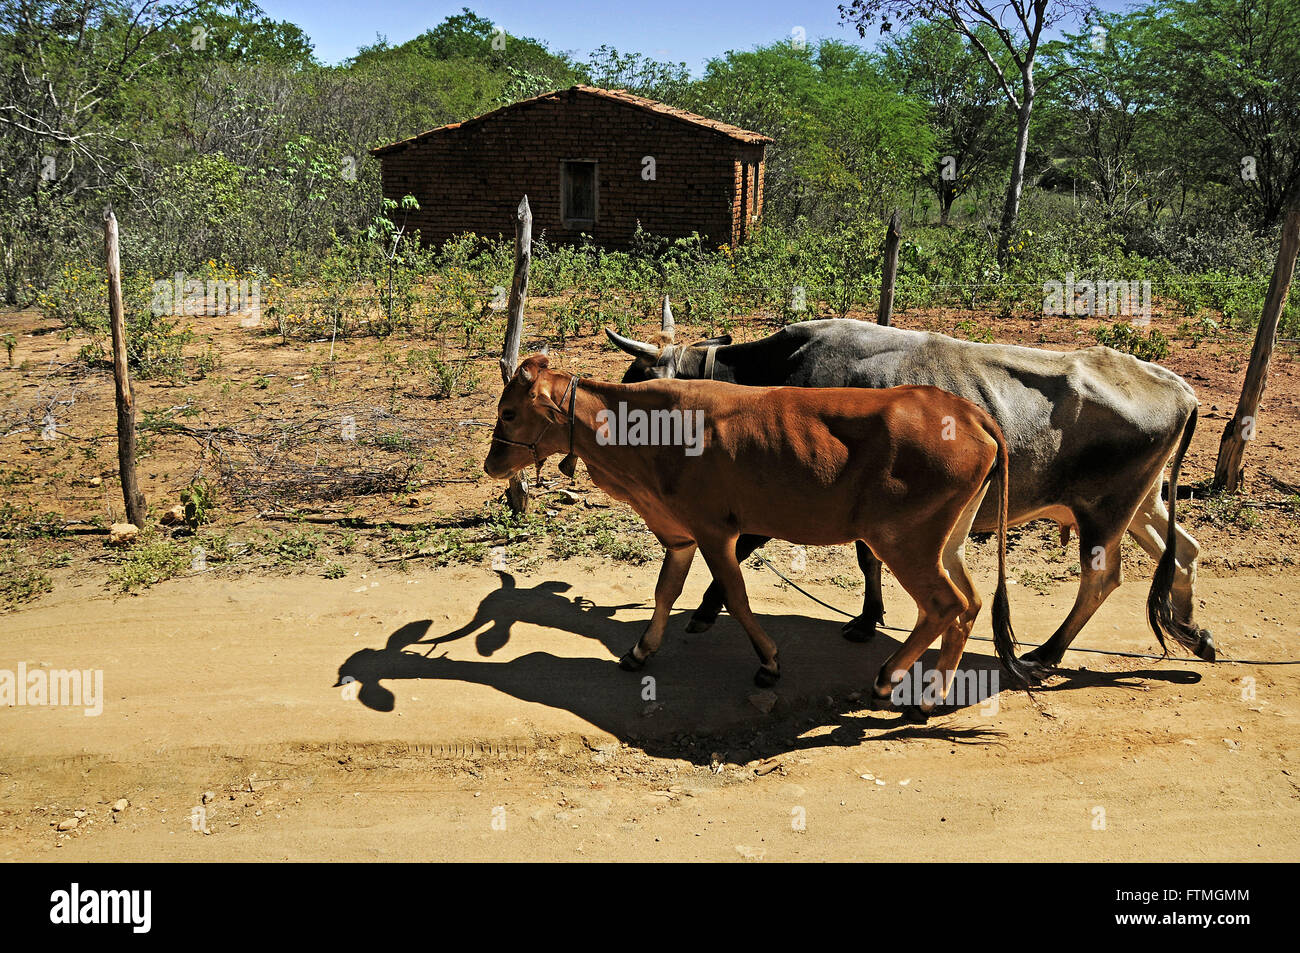 Cattle in the rural town of Triunfo Stock Photo